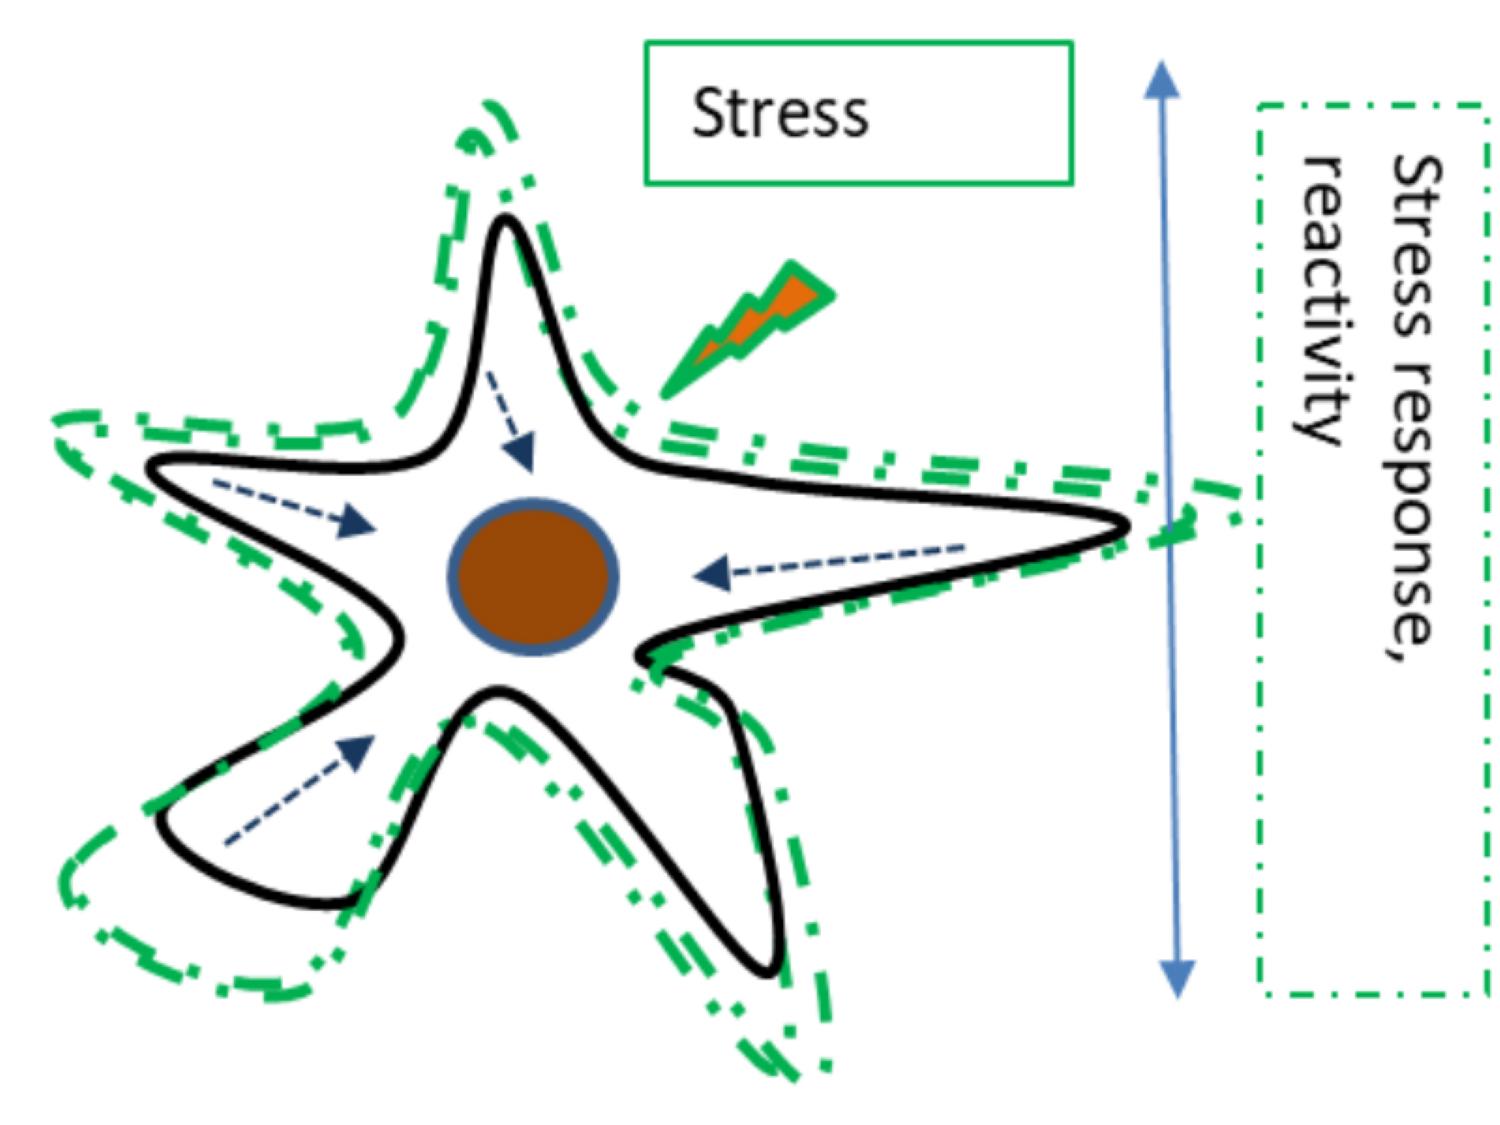 Determining the effect of protein quality control to astrocyte stress responses